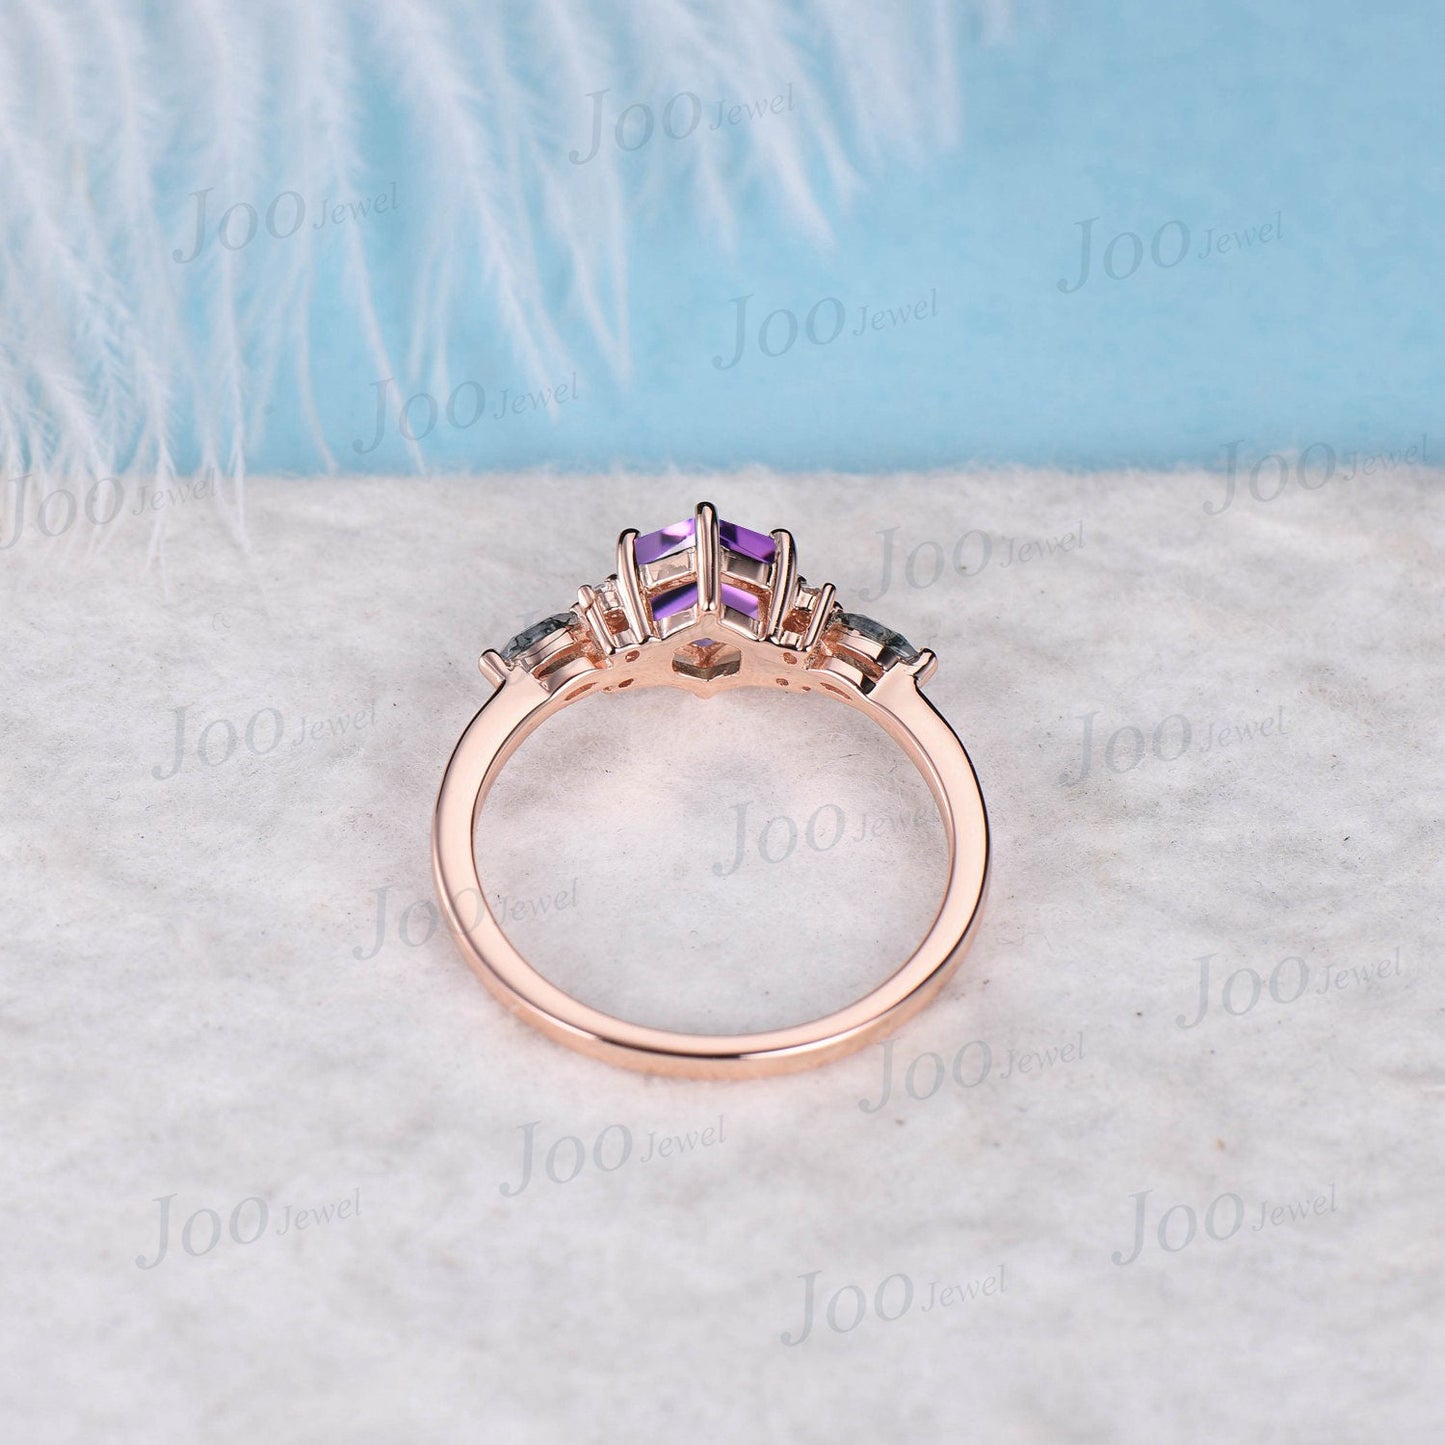 Unique Natural Amethyst Promise Ring Rose Gold Hexagon Amethyst Engagement Ring Moss Agate Wedding Ring Bridal Anniversary Ring Gift Women